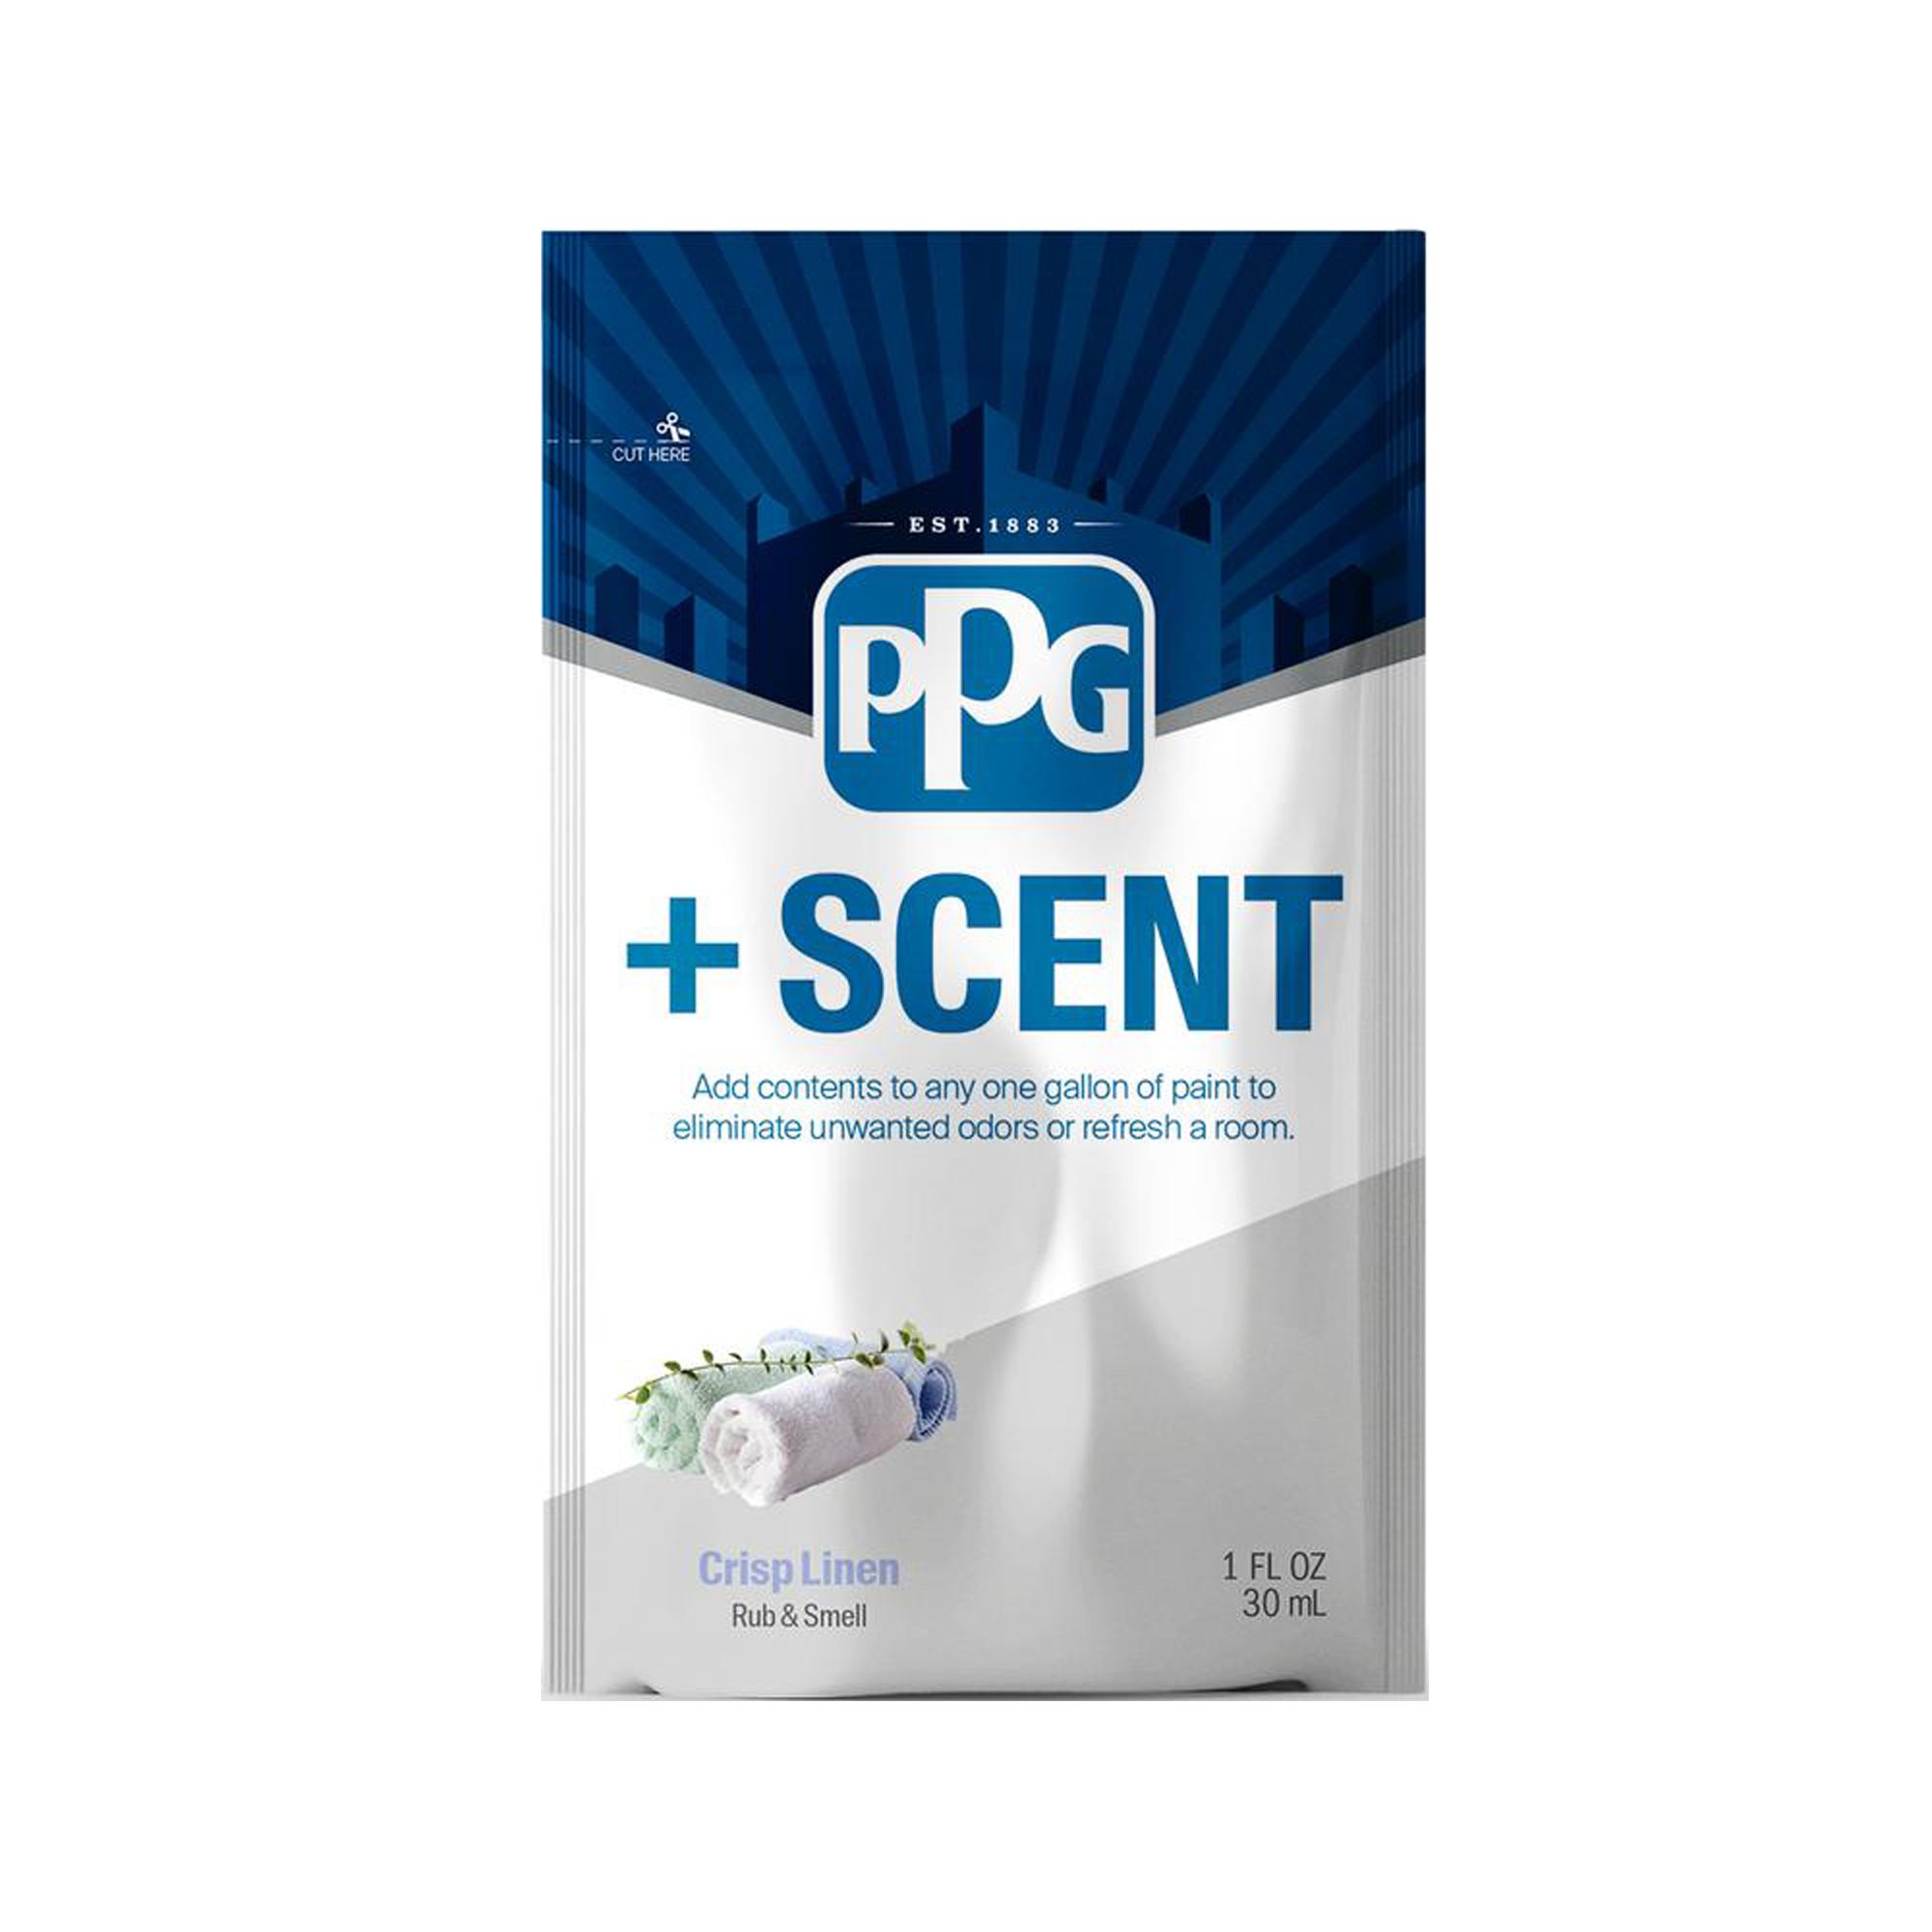 PPG +Scent Professional Quality Paint Products PPG